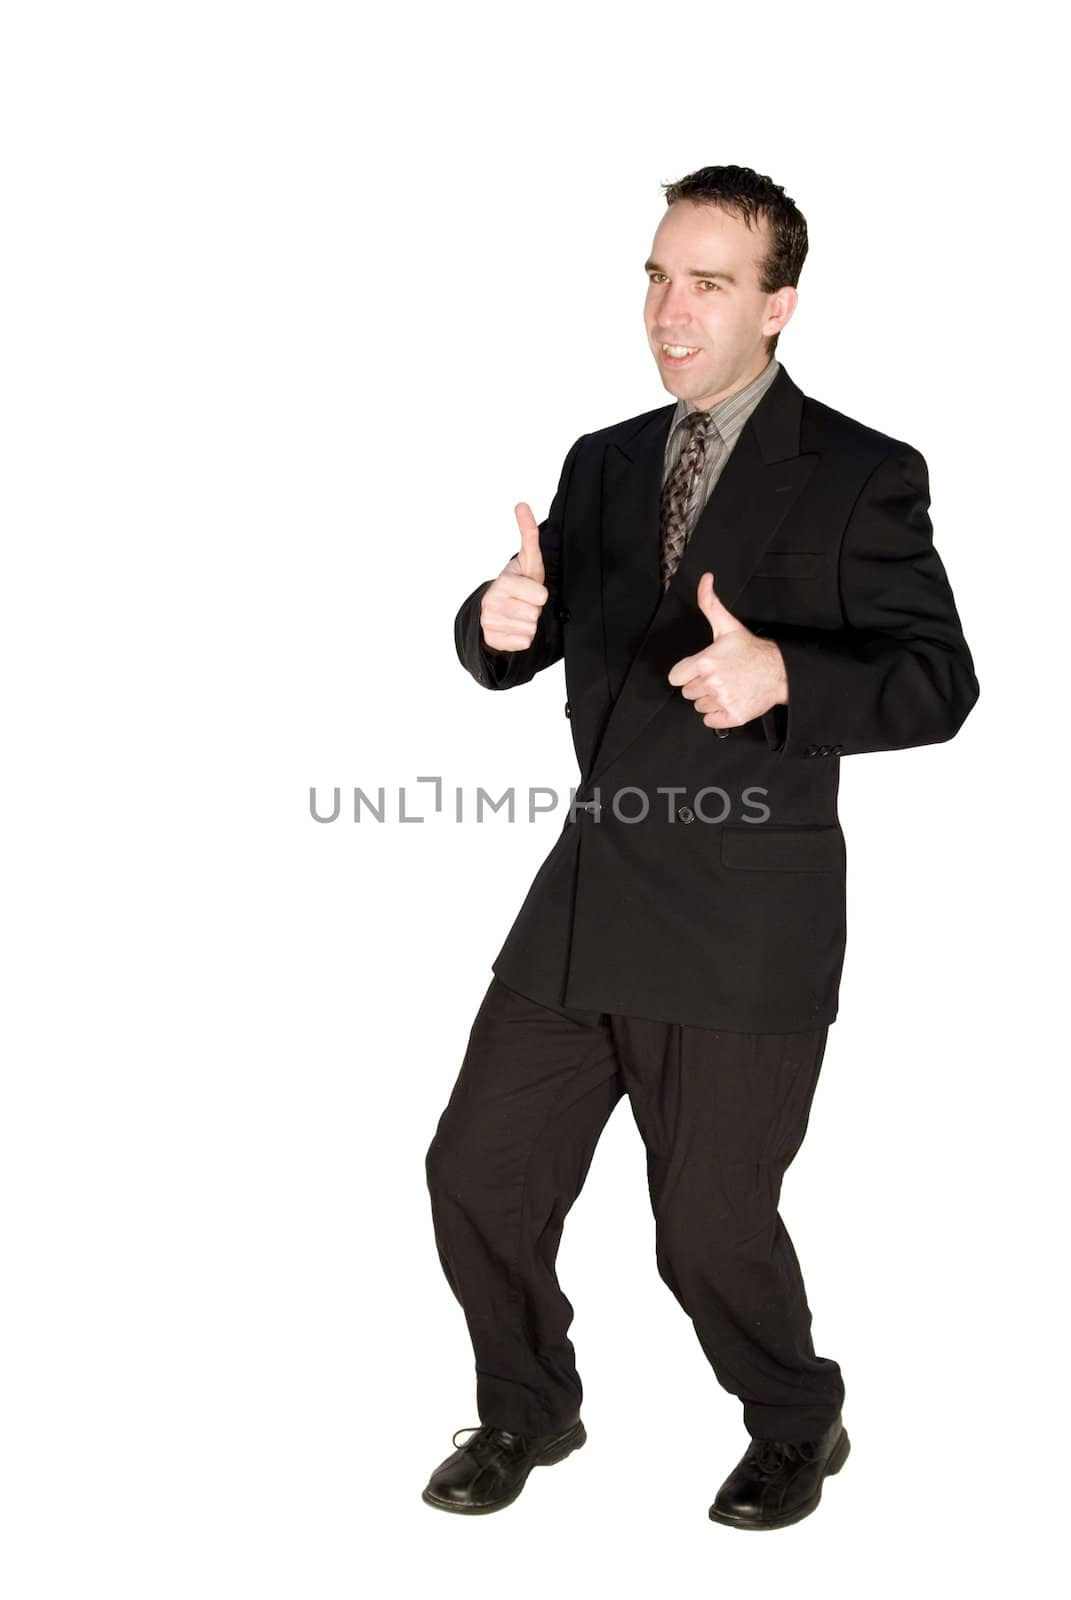 Young good looking businessman gives a thumbs up in response to a promotion